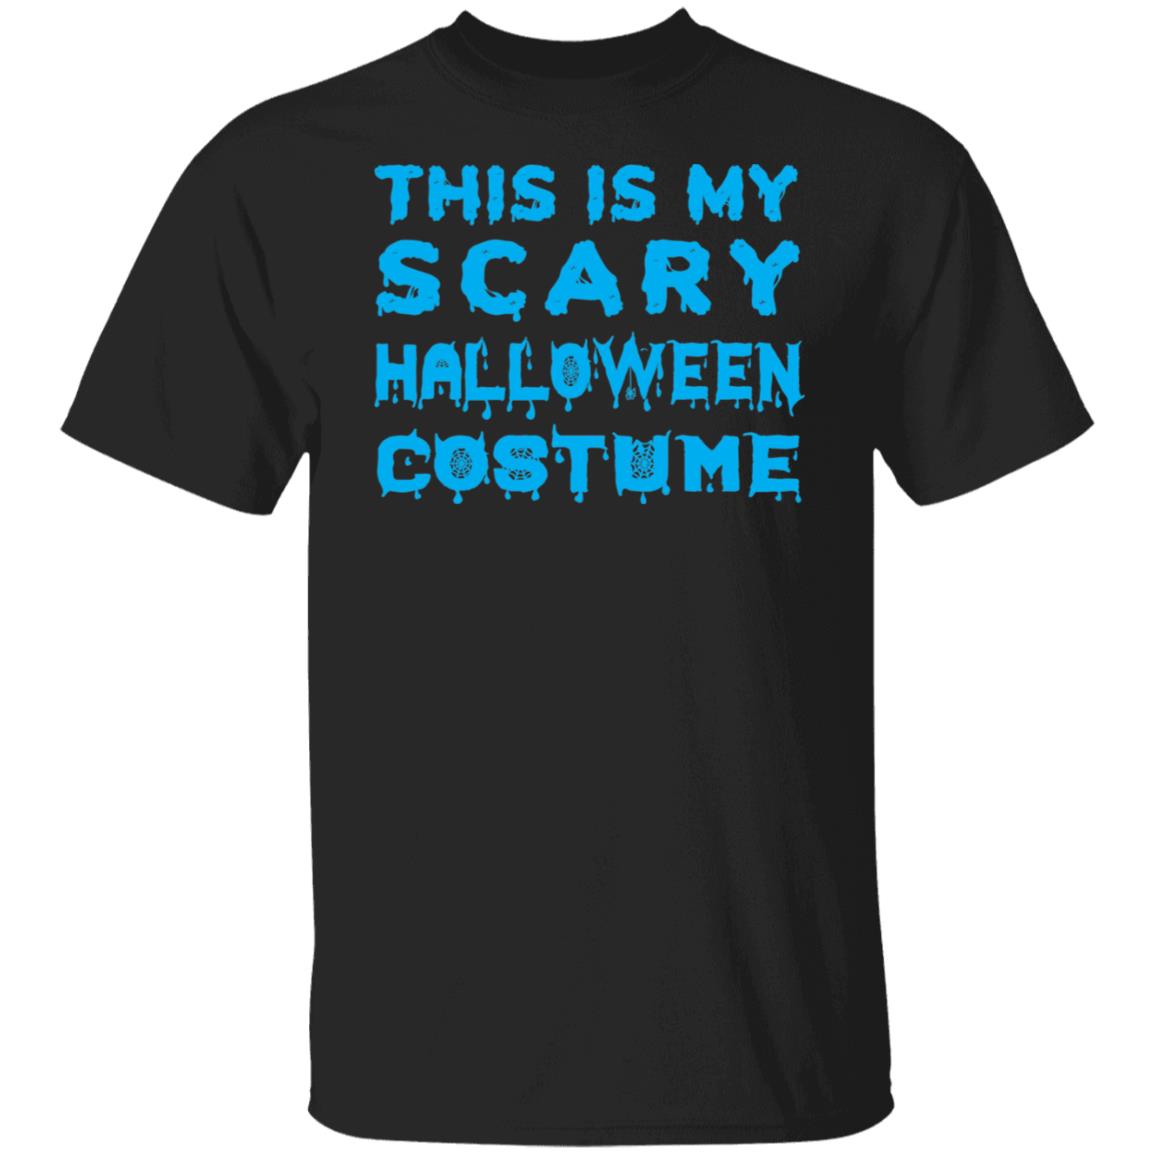 This is My Scary Halloween Costume Shirt